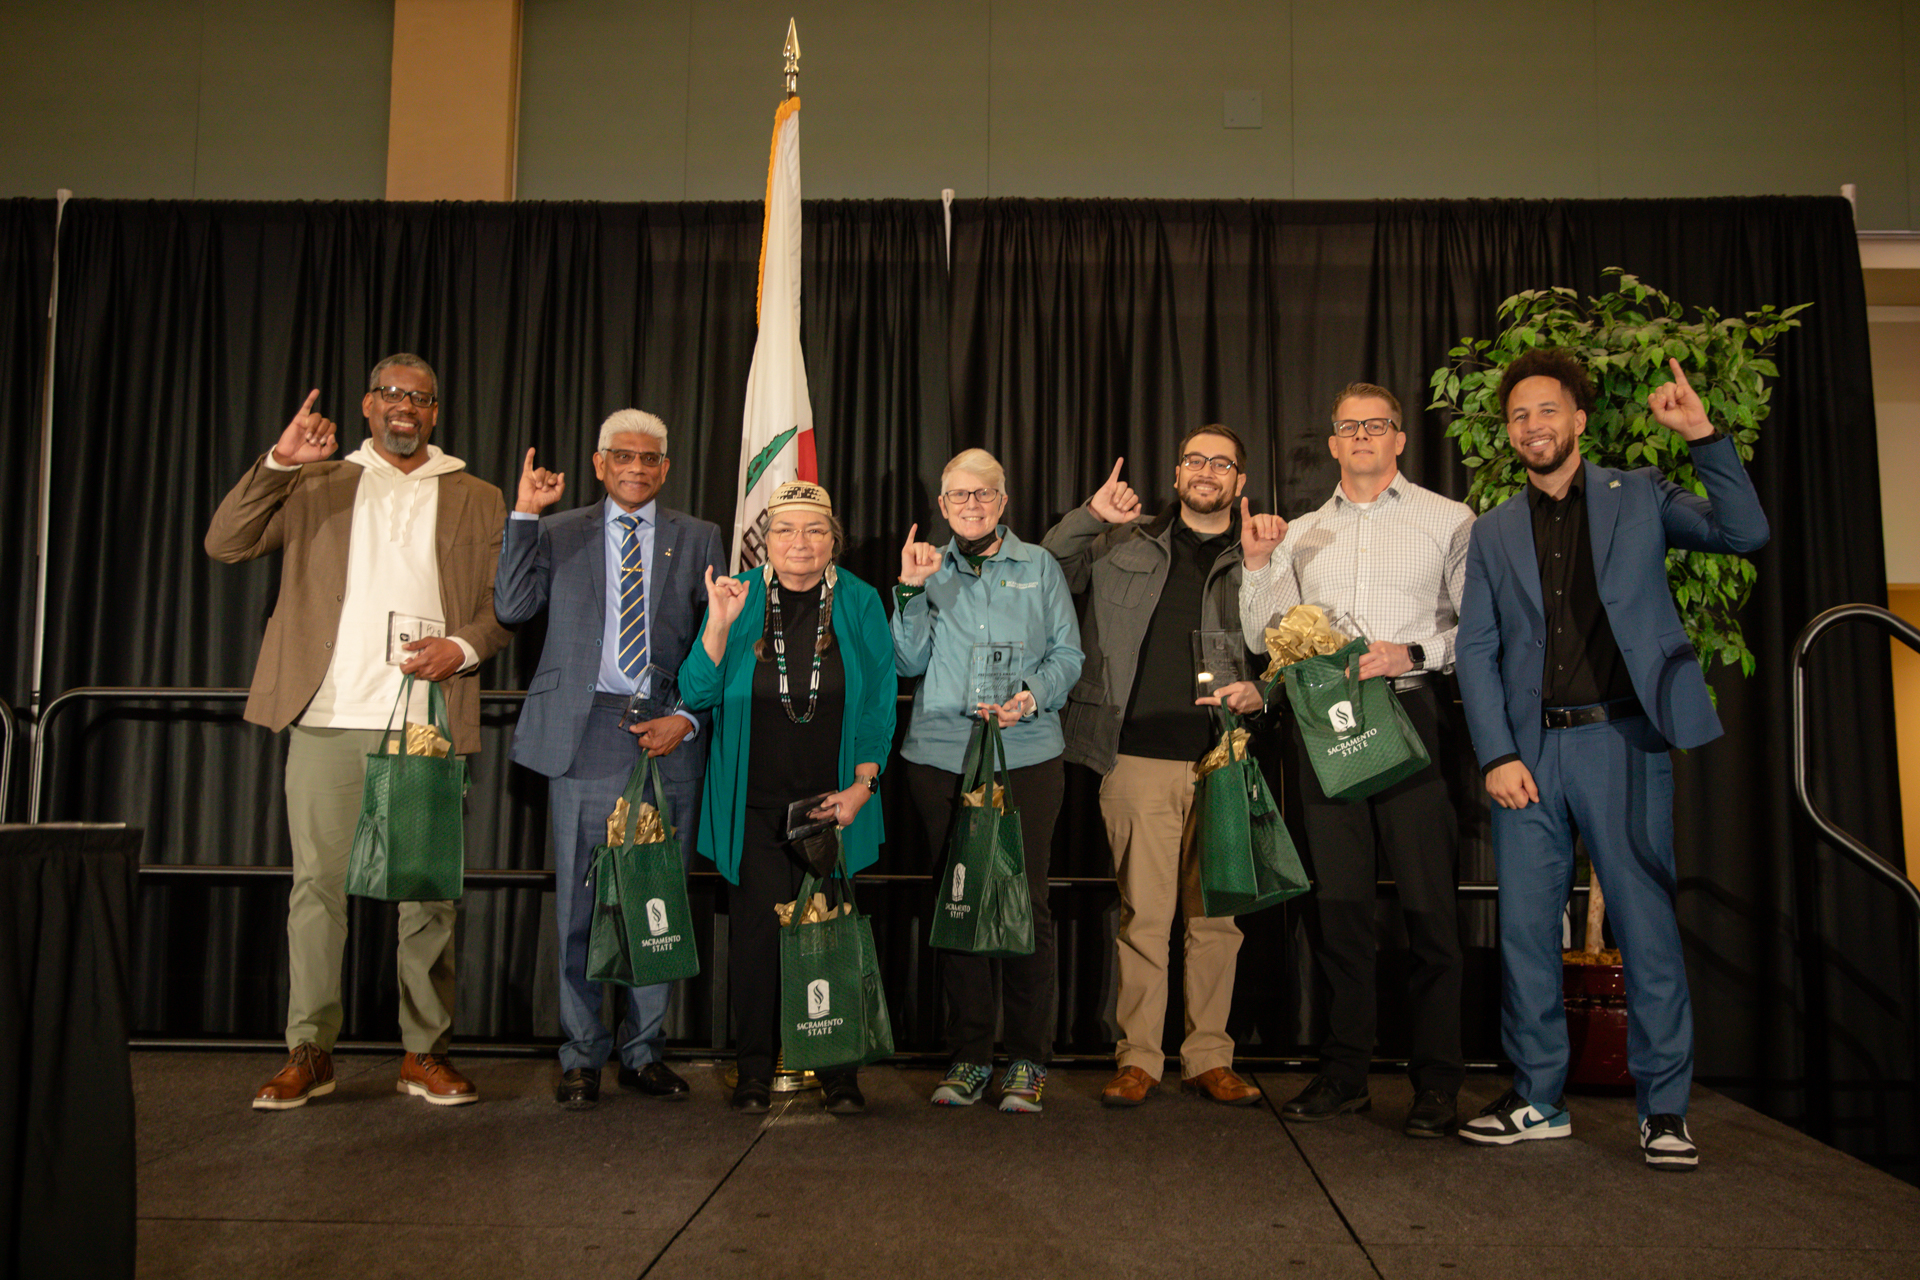 Members of the Sac State faculty pose on stage with Stingers Up during the Fall Address.